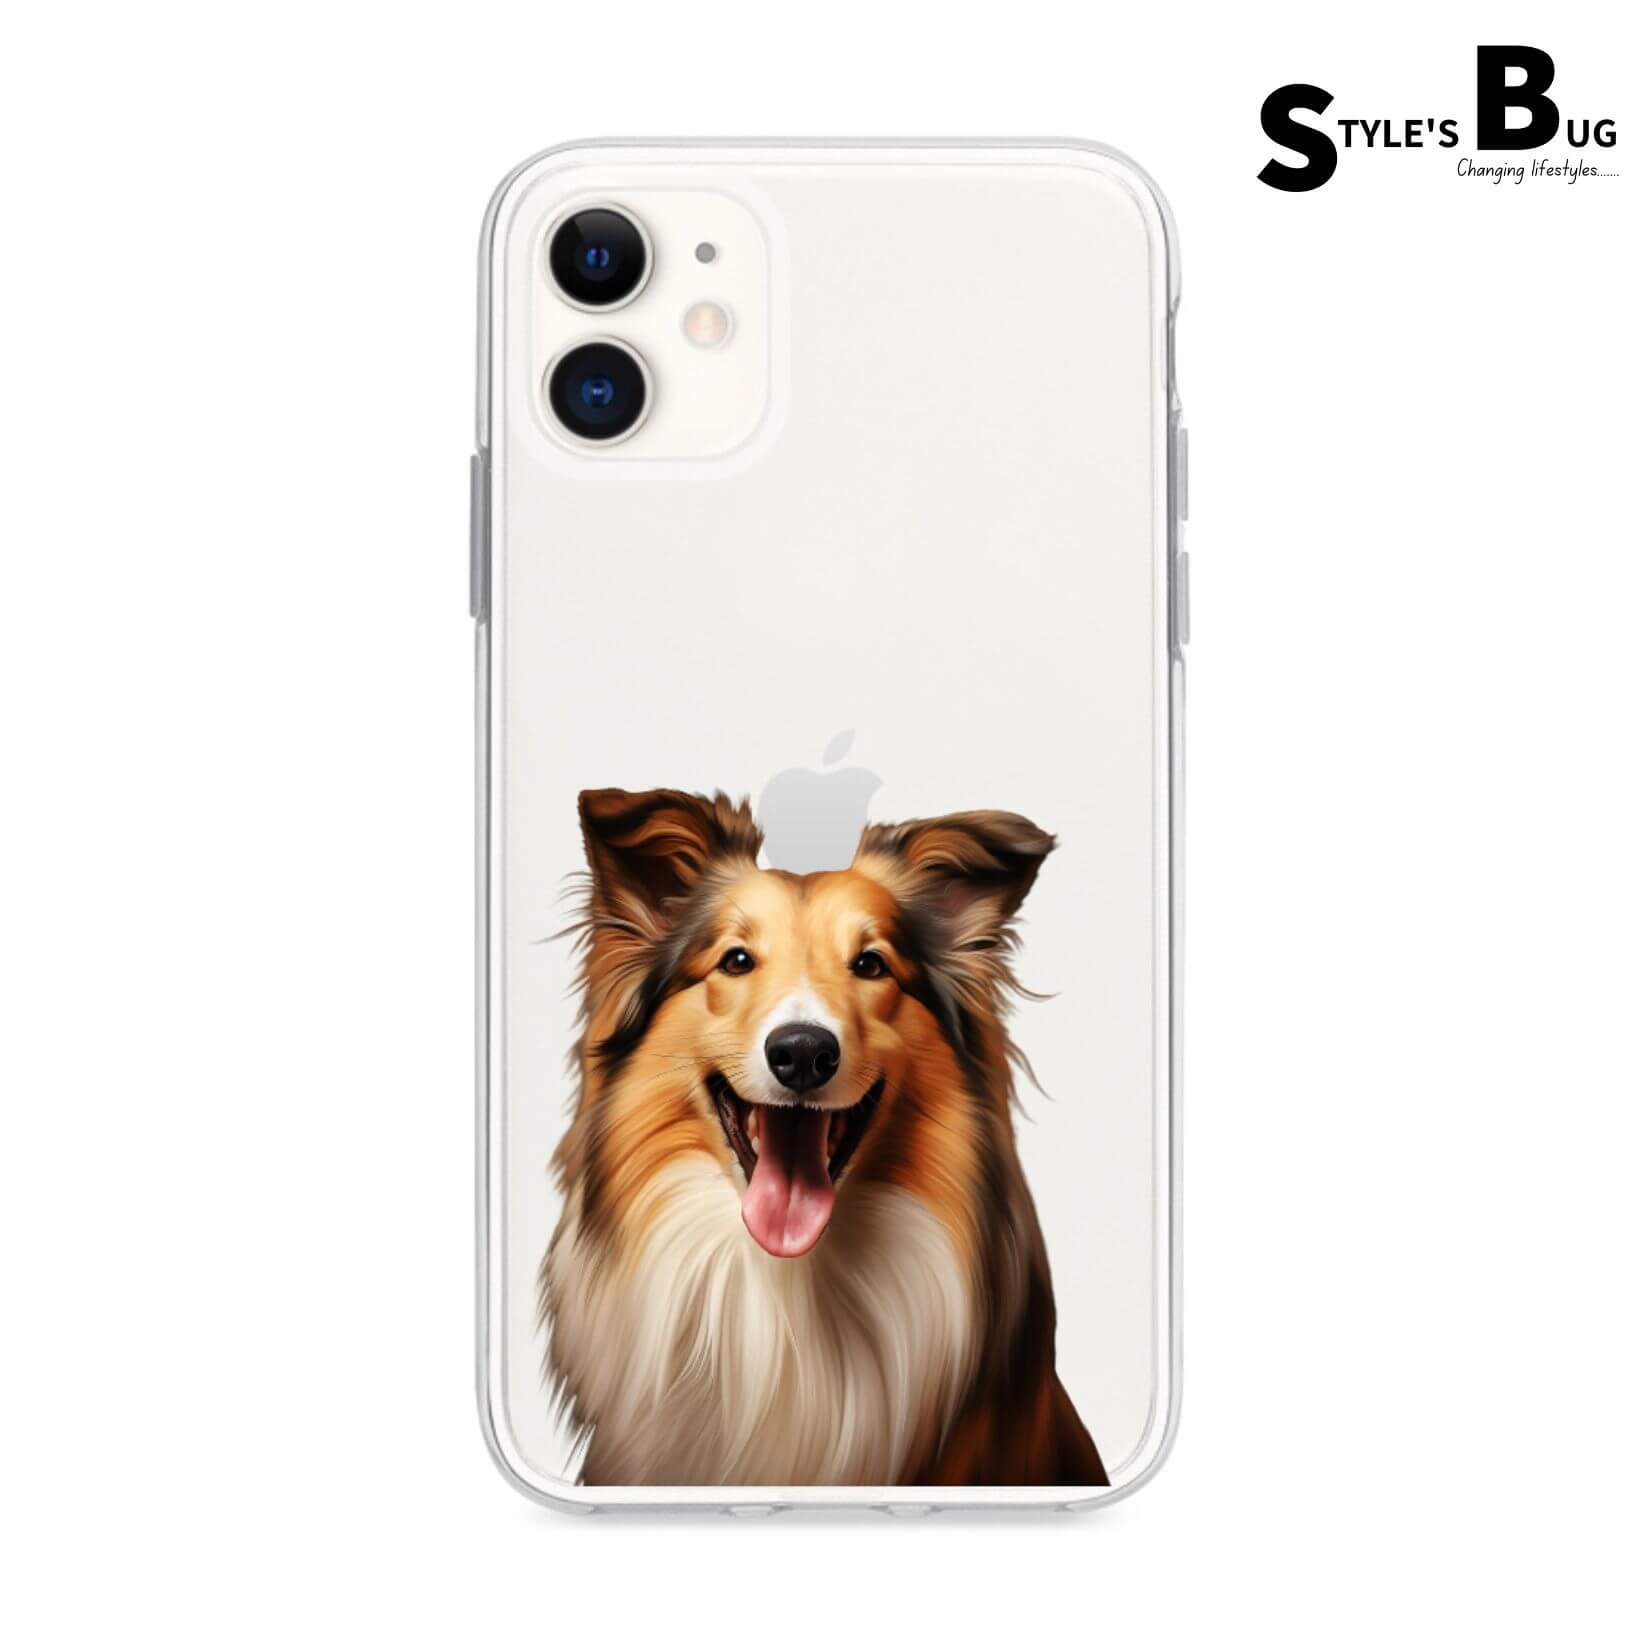 Smiling Dog phone cases from Style's Bug (UV printed) - Style's Bug Rough Collie